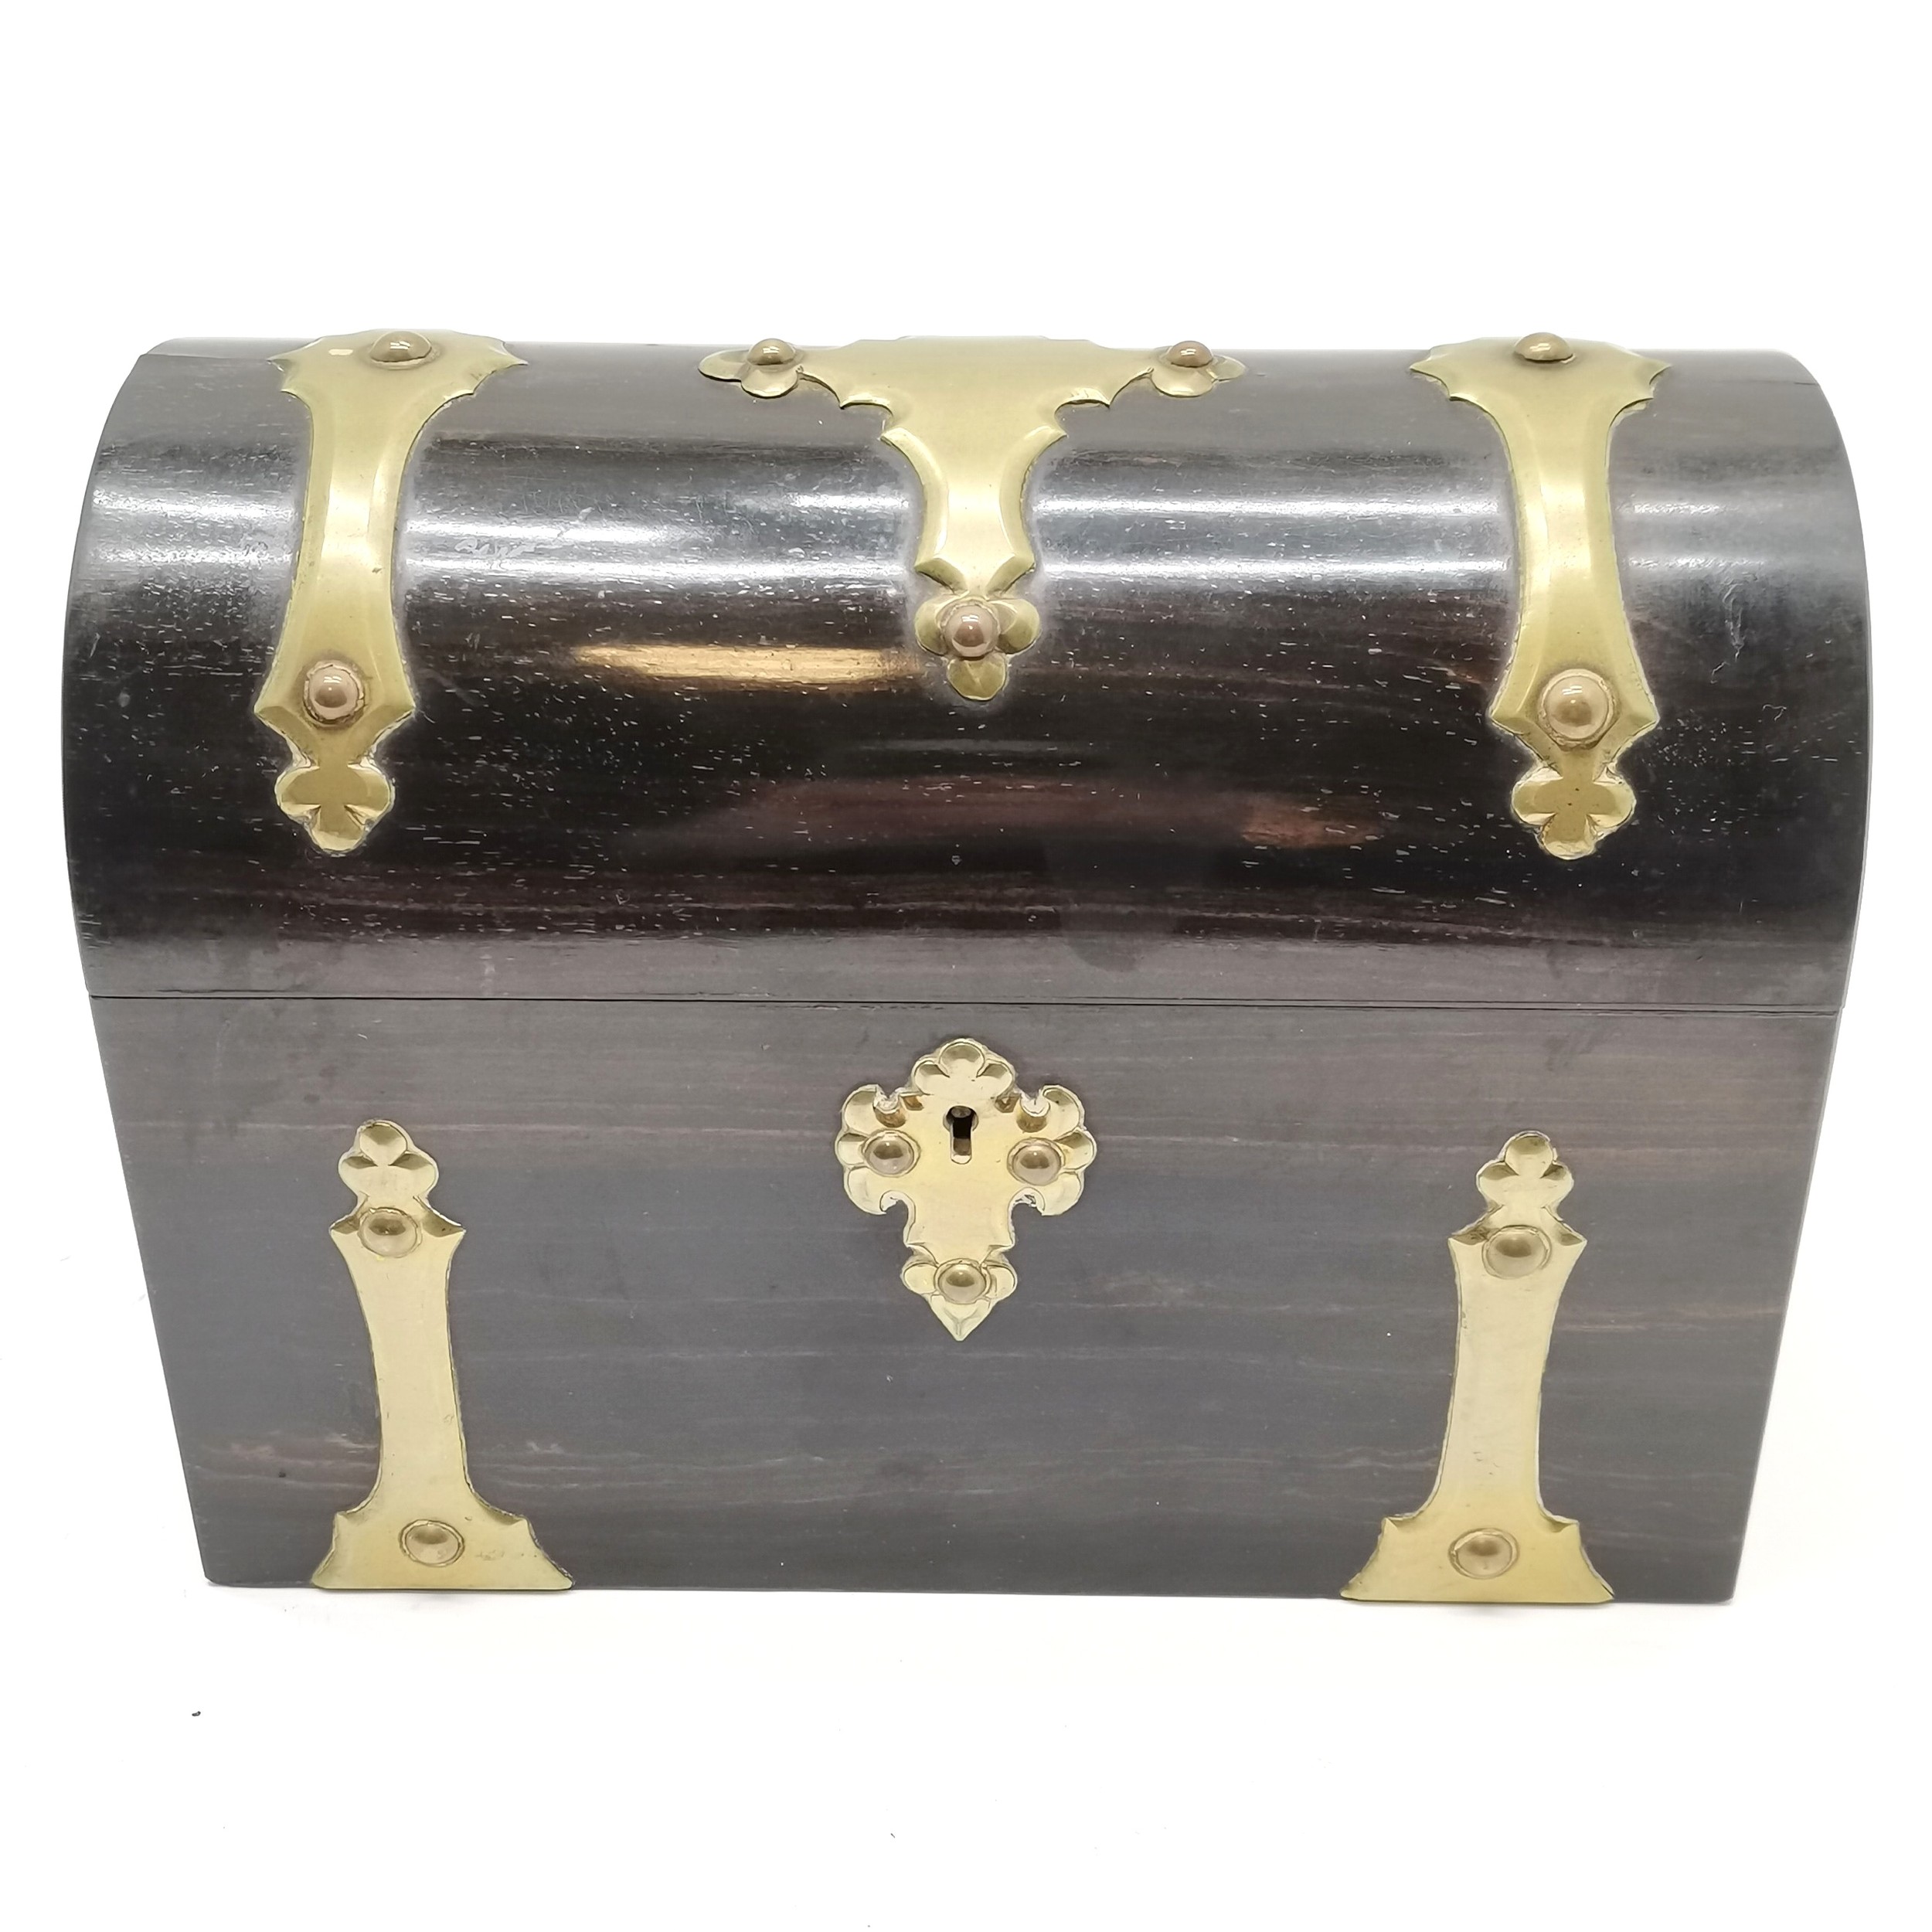 Antique coromandel wooden domed lidded stationery box with brass mounts - 22cm across x 16cm high